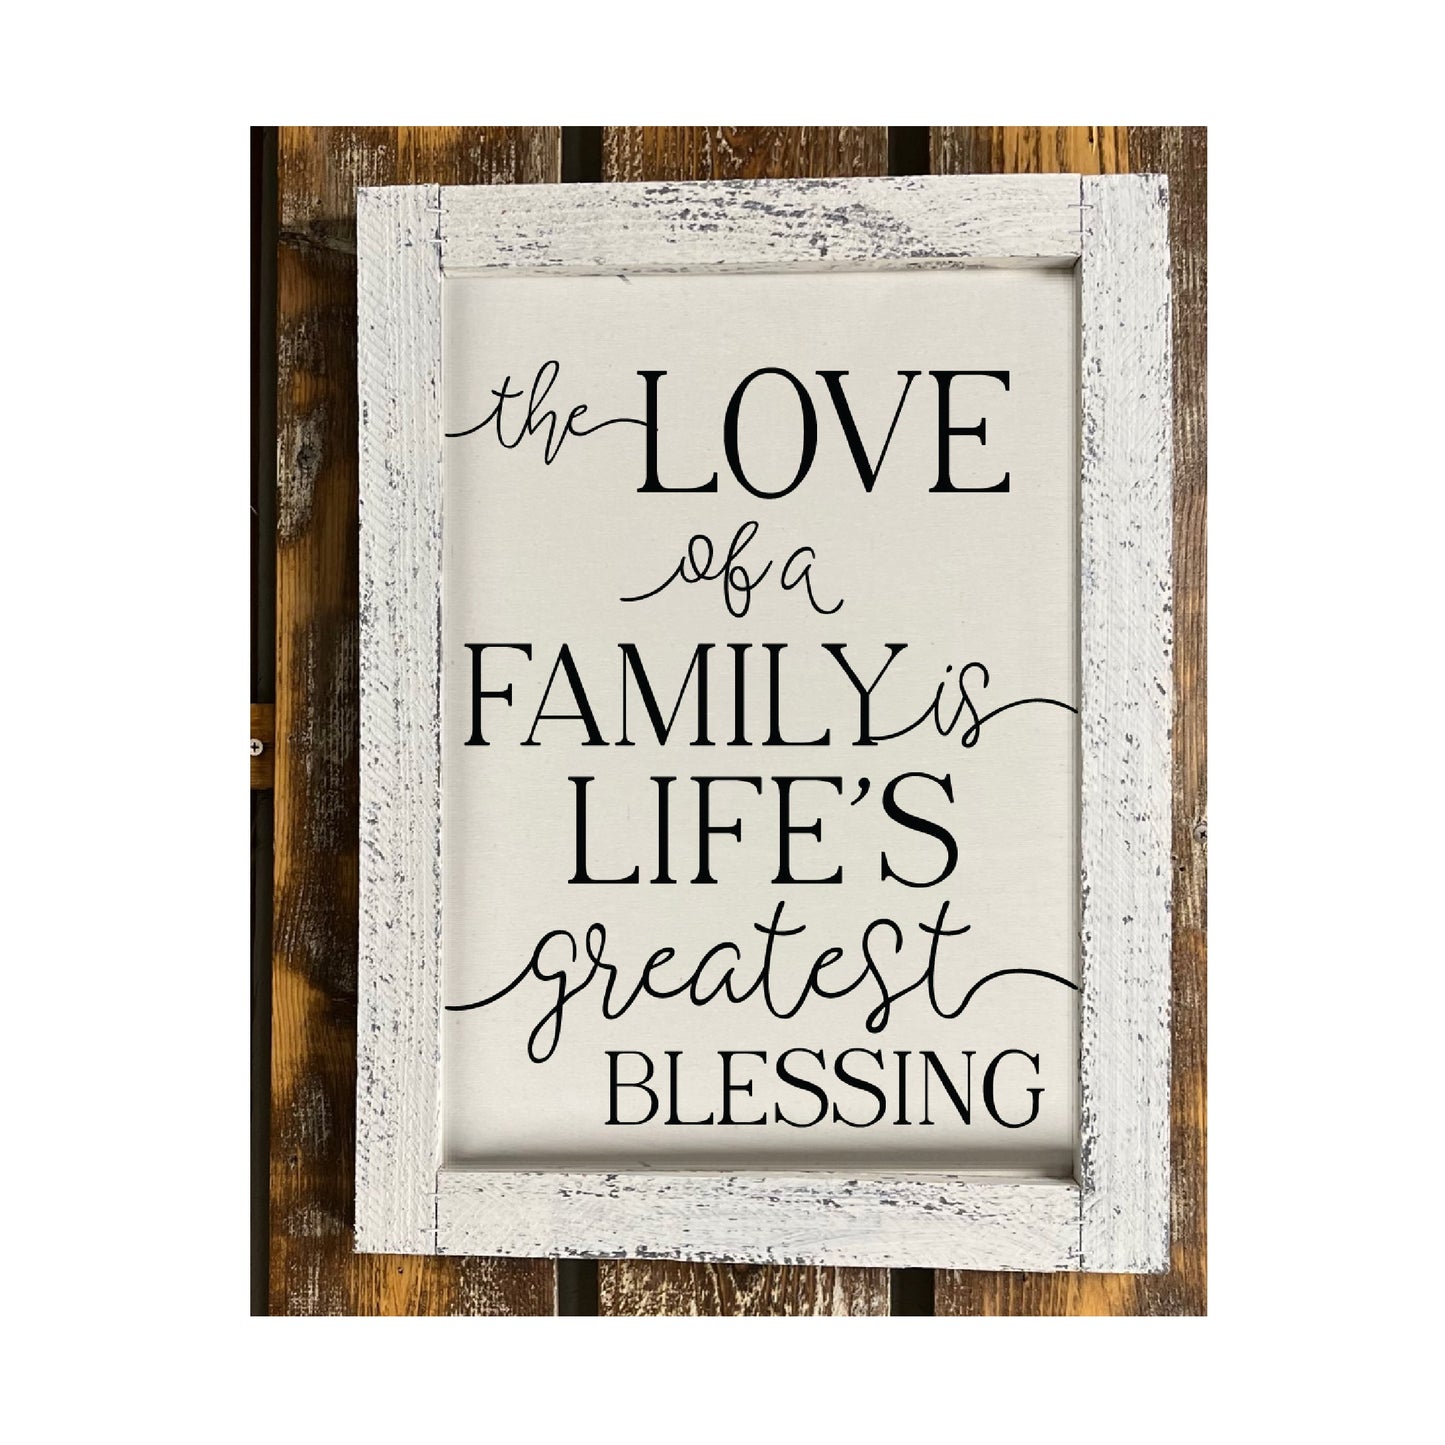 The Love Of A Family is Life's Greatest Blessing